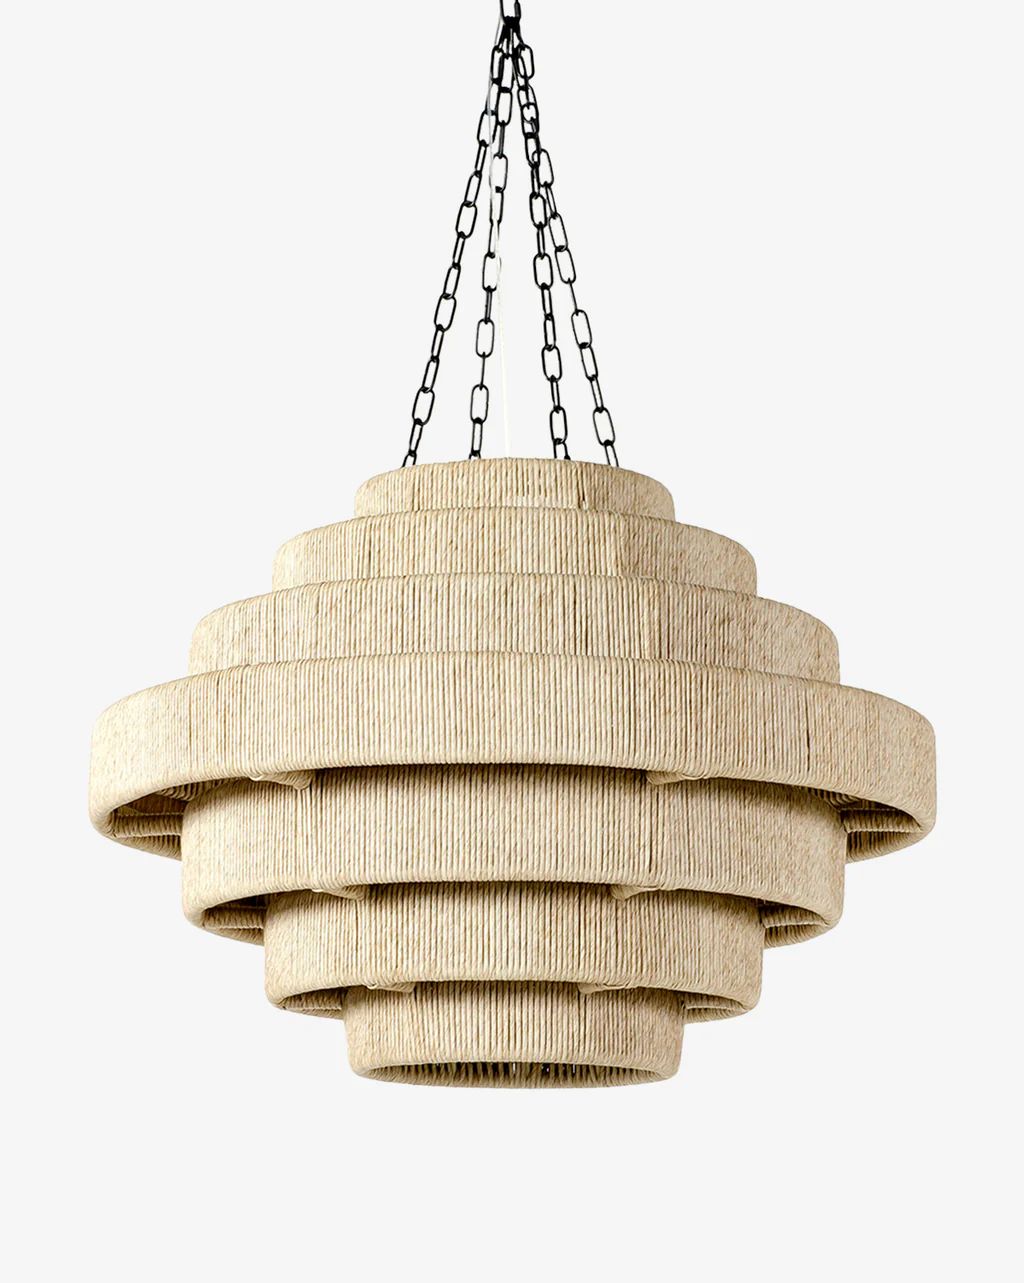 Everly Outdoor Pendant | McGee & Co. (US)